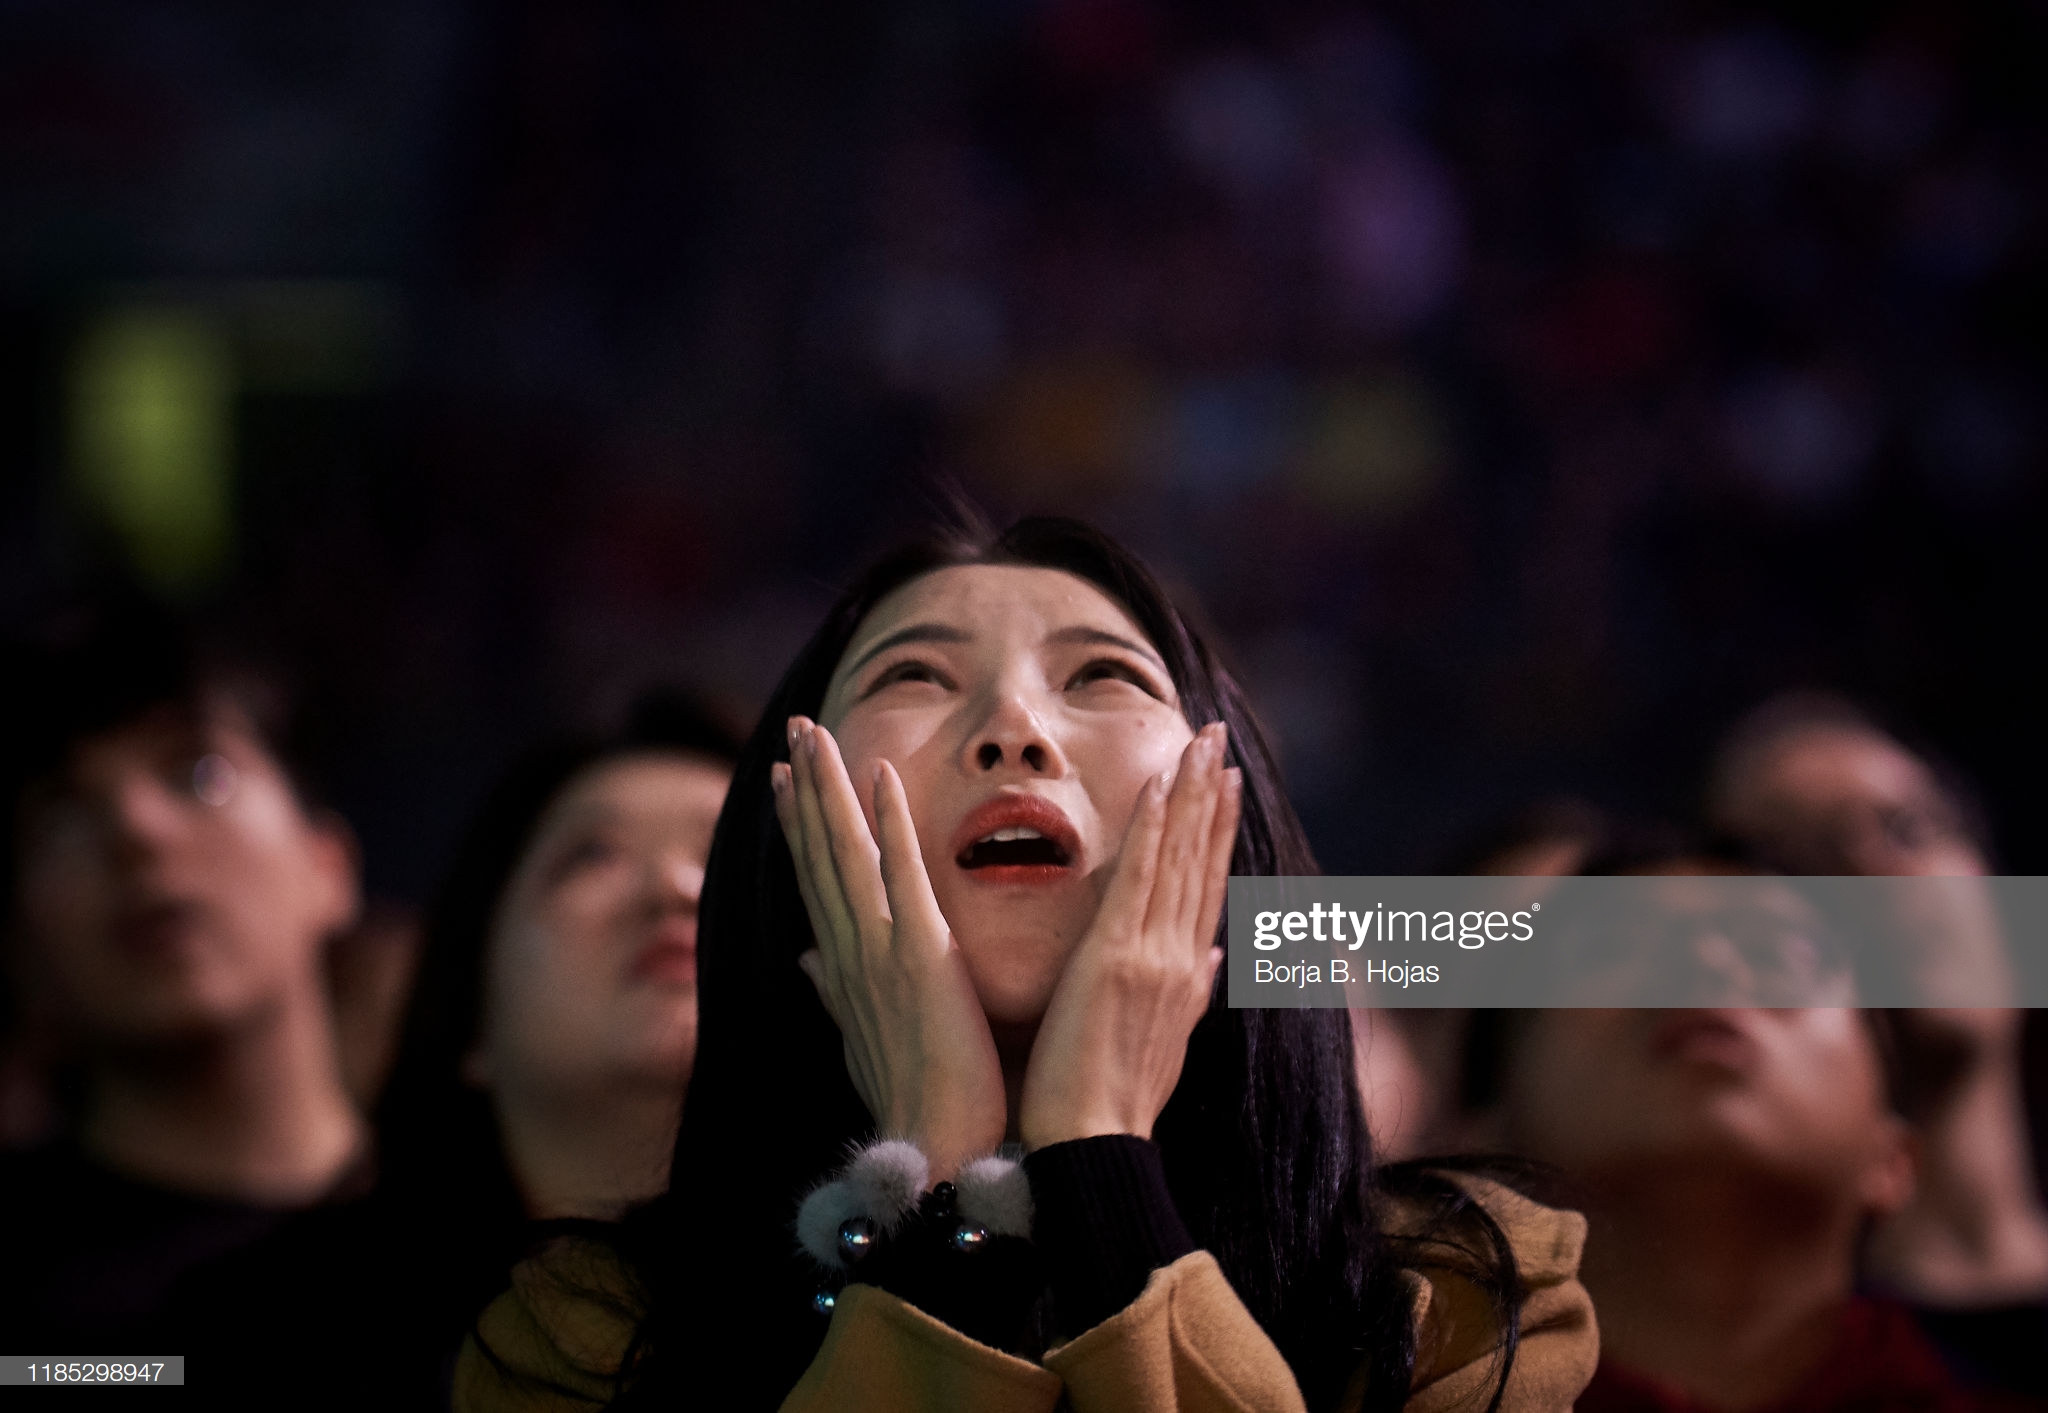 gettyimages-1185298947-2048x2048.jpg